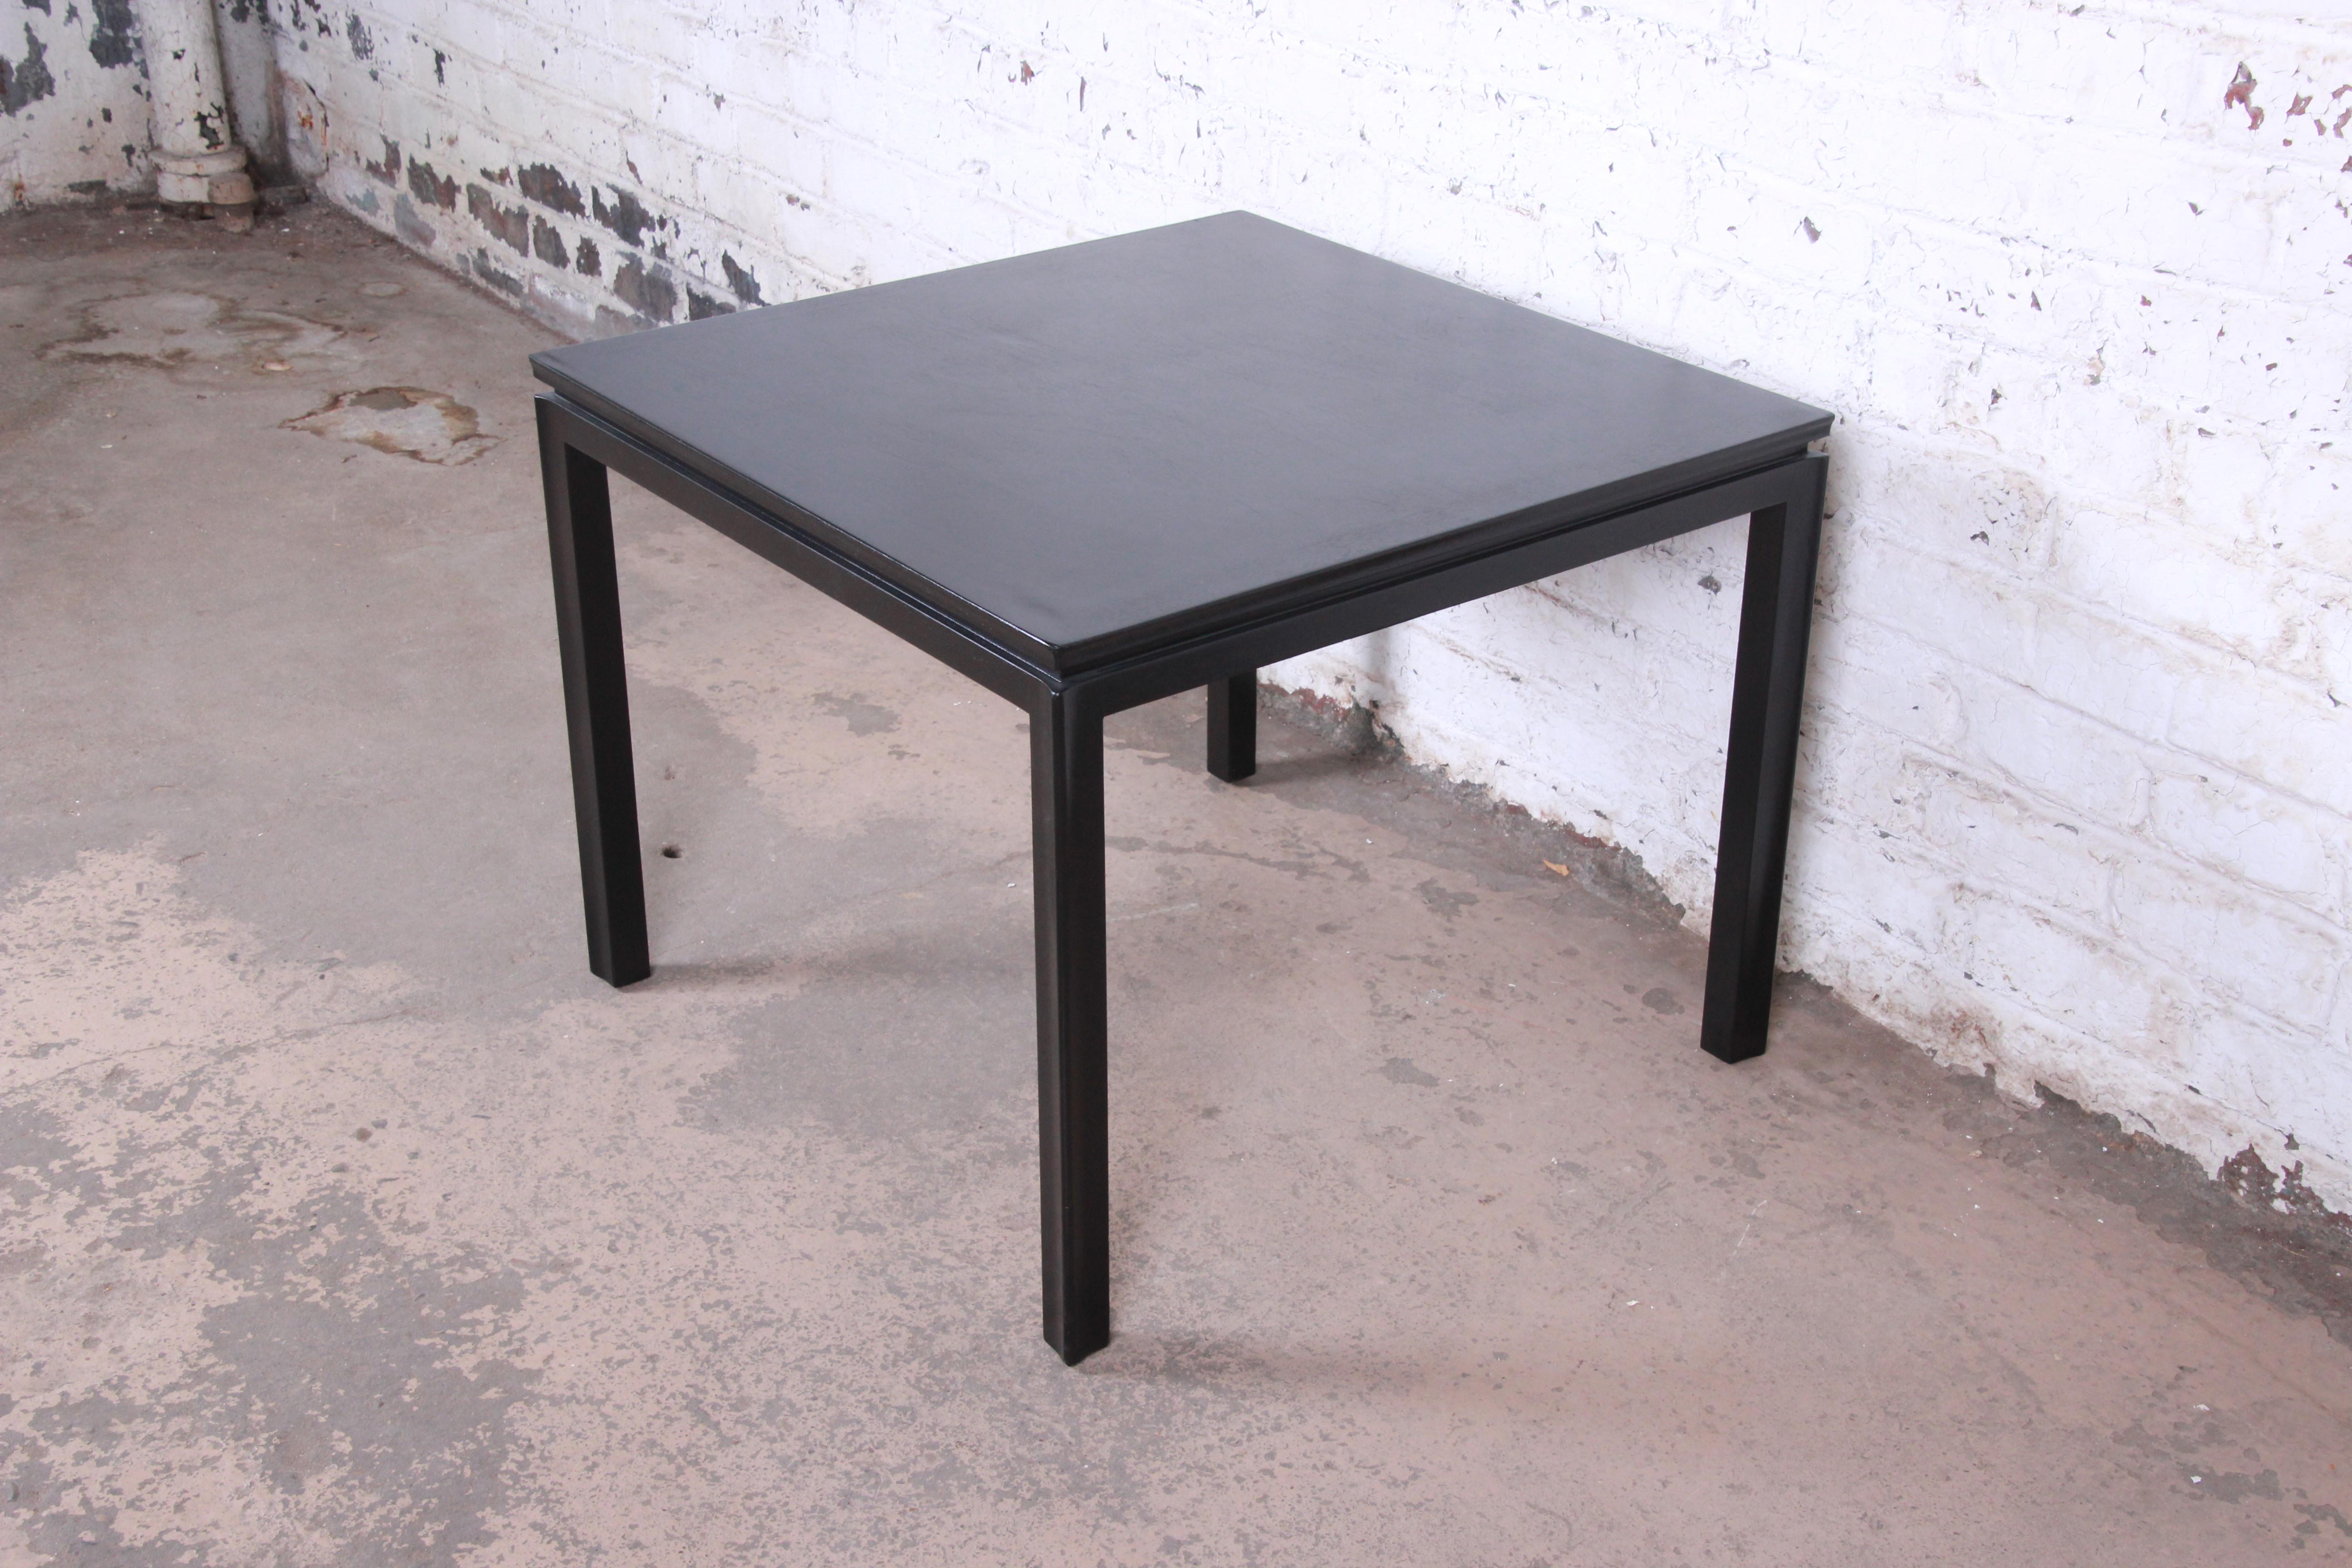 Mid-20th Century Edward Wormley for Dunbar Ebonized Mahogany Game Table or Side Table, Refinished